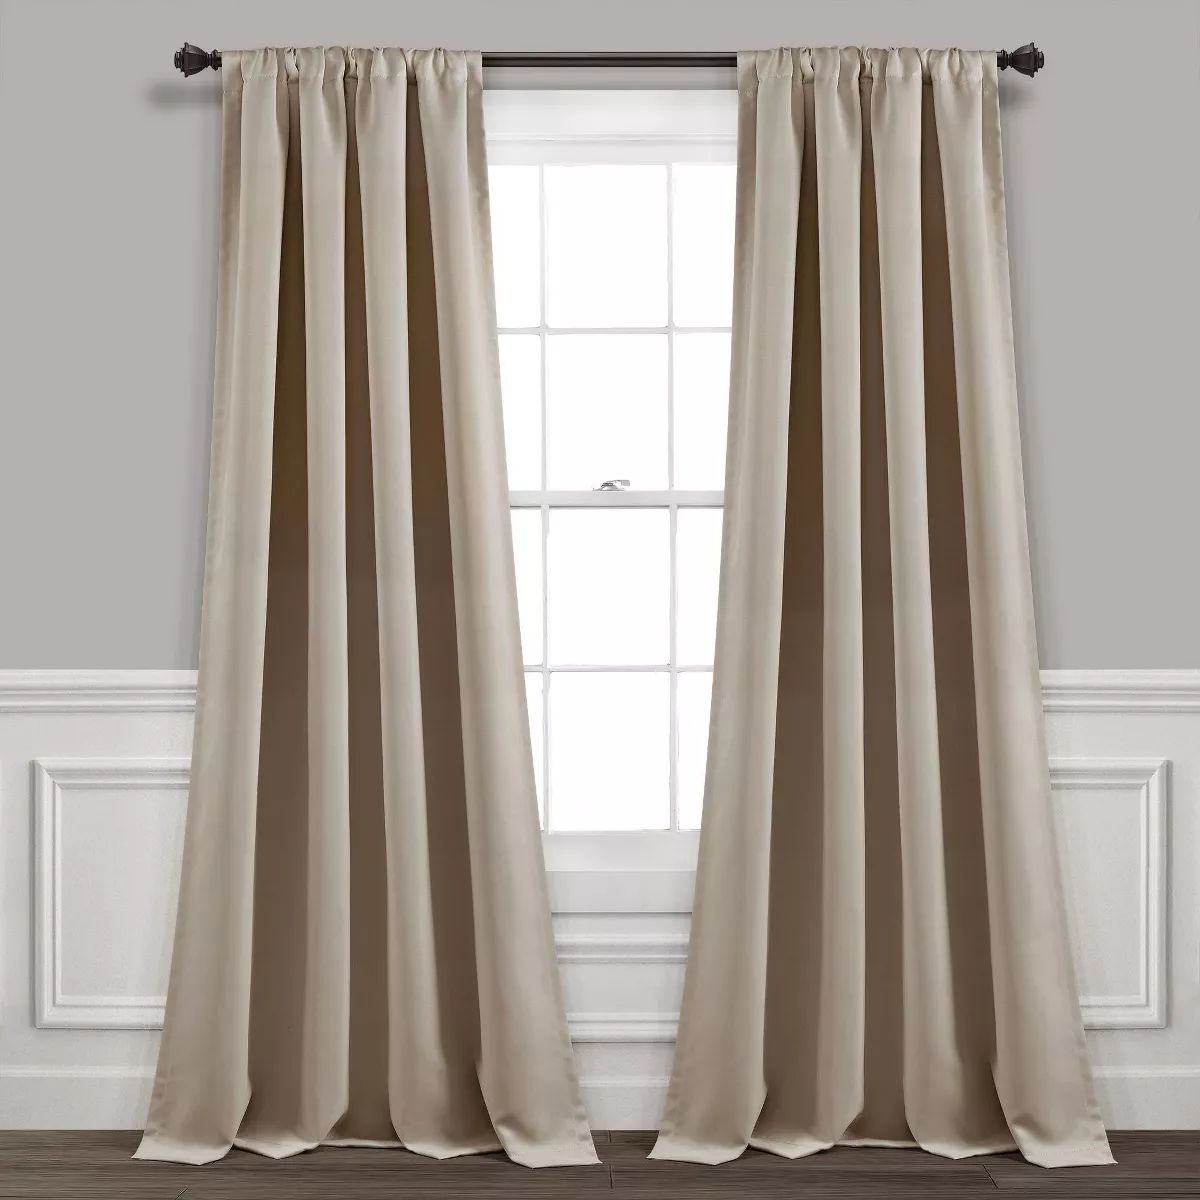 Set of 2 Insulated Rod Pocket Blackout Window Curtain Panels - Lush Décor | Target